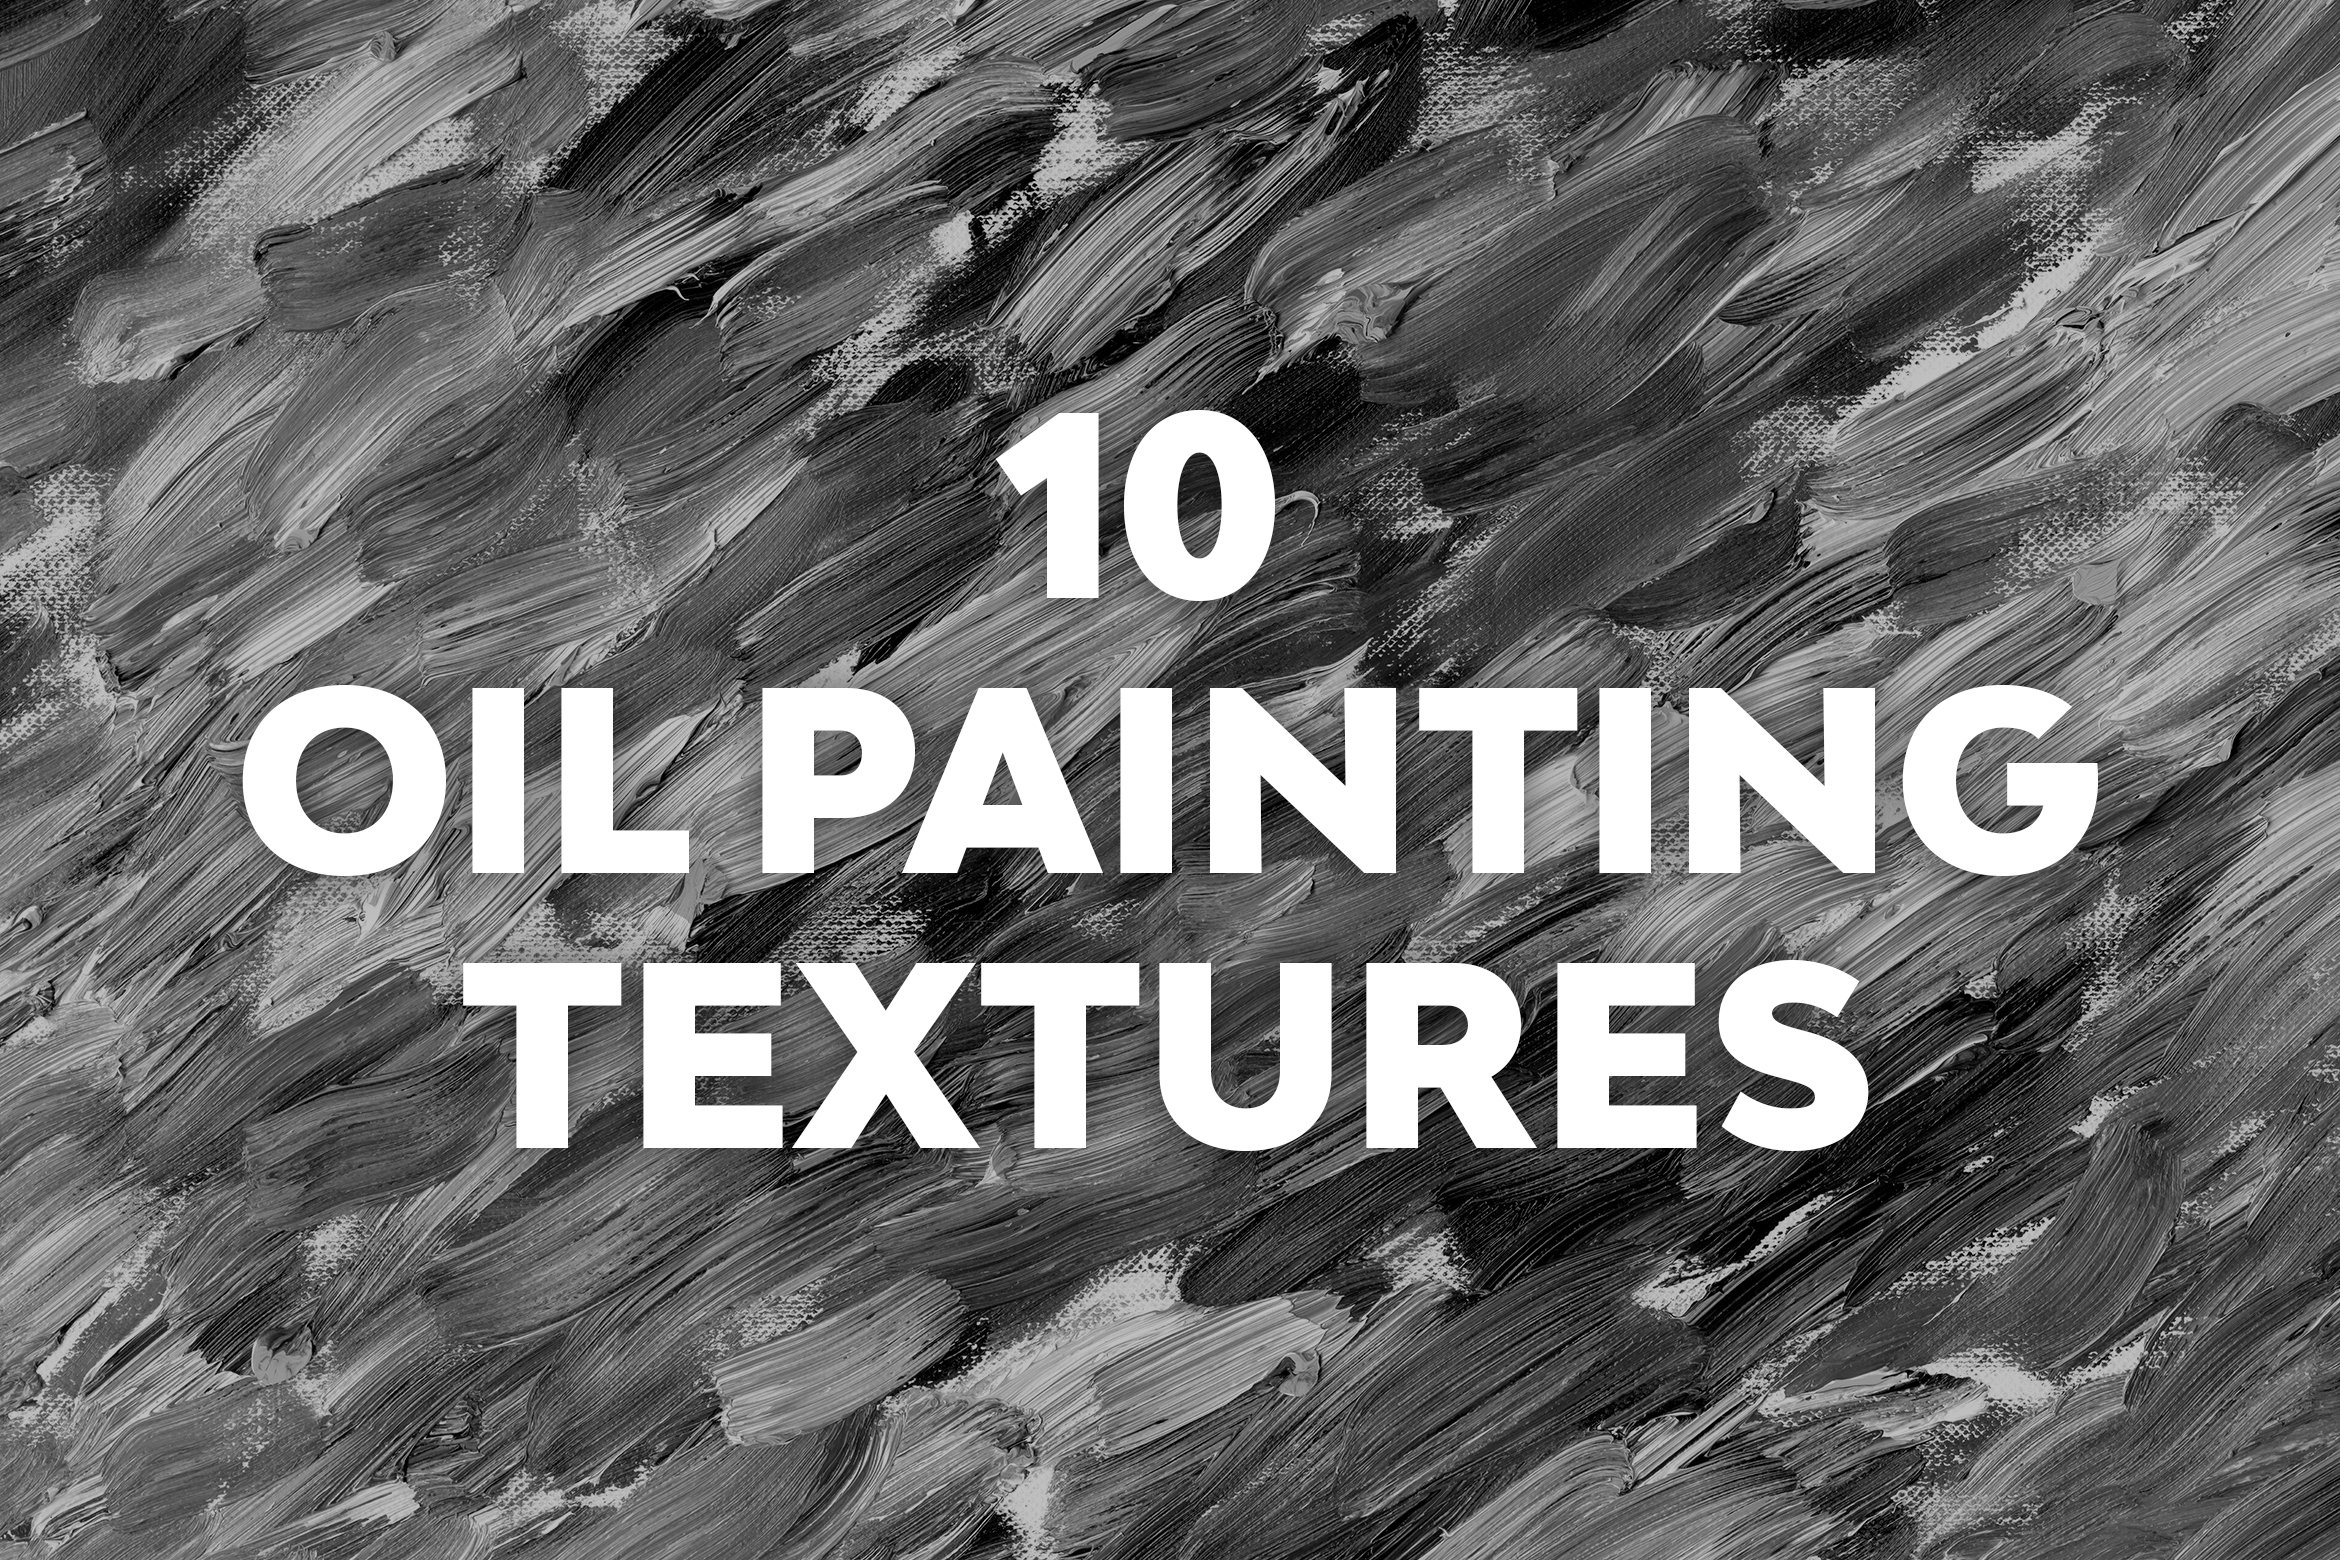 Oil Painting Texture cover image.